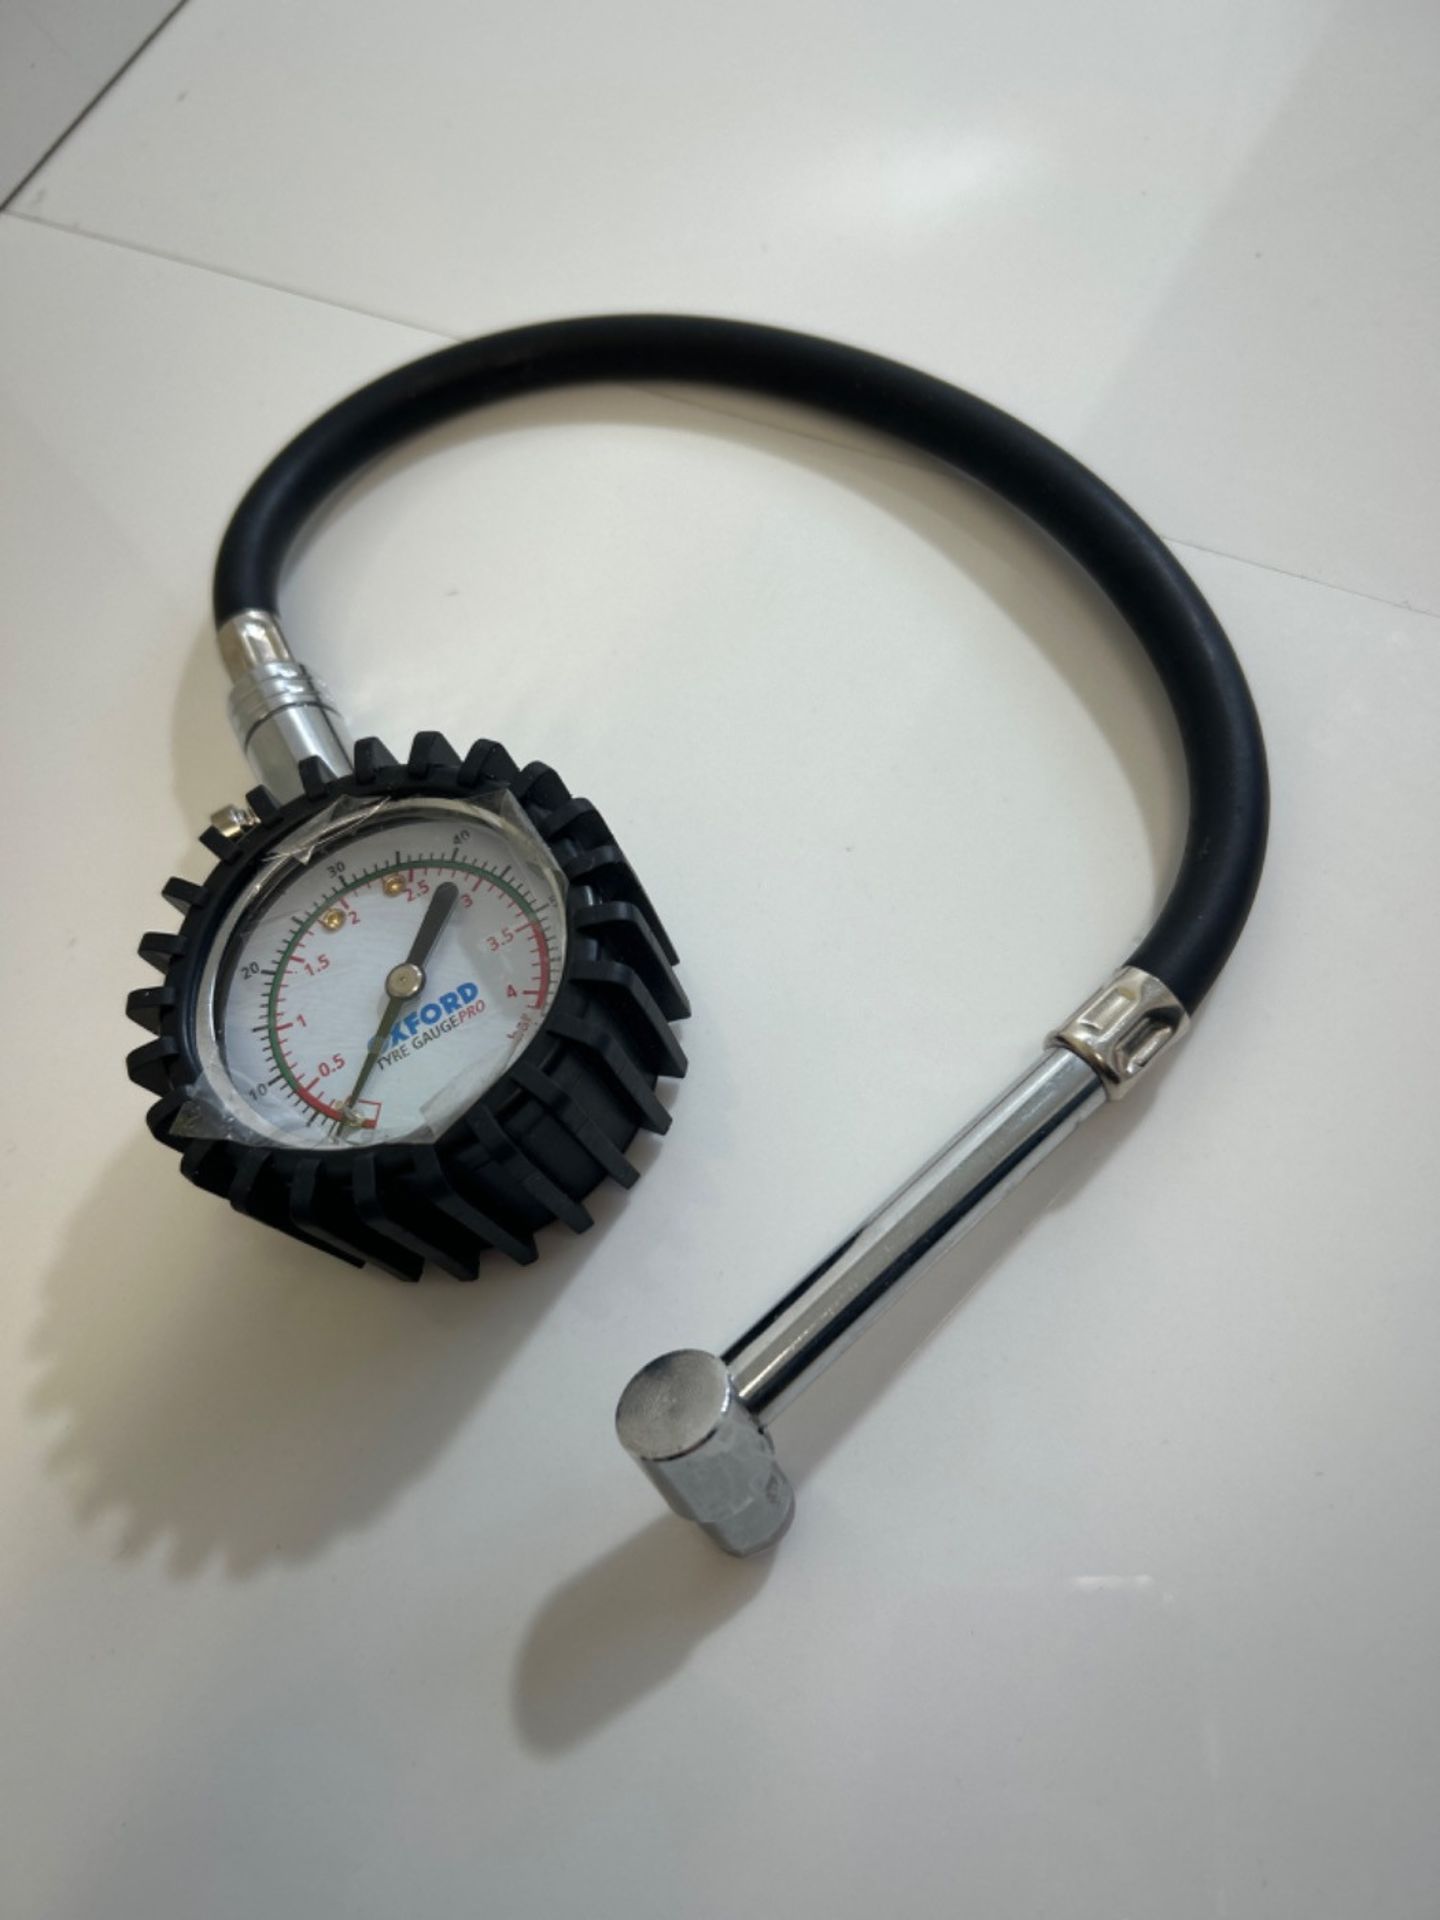 Oxford Tyre Pressure Gauge Pro Analogue (Dial Type) 0-60PSI Ox750 - Image 2 of 3